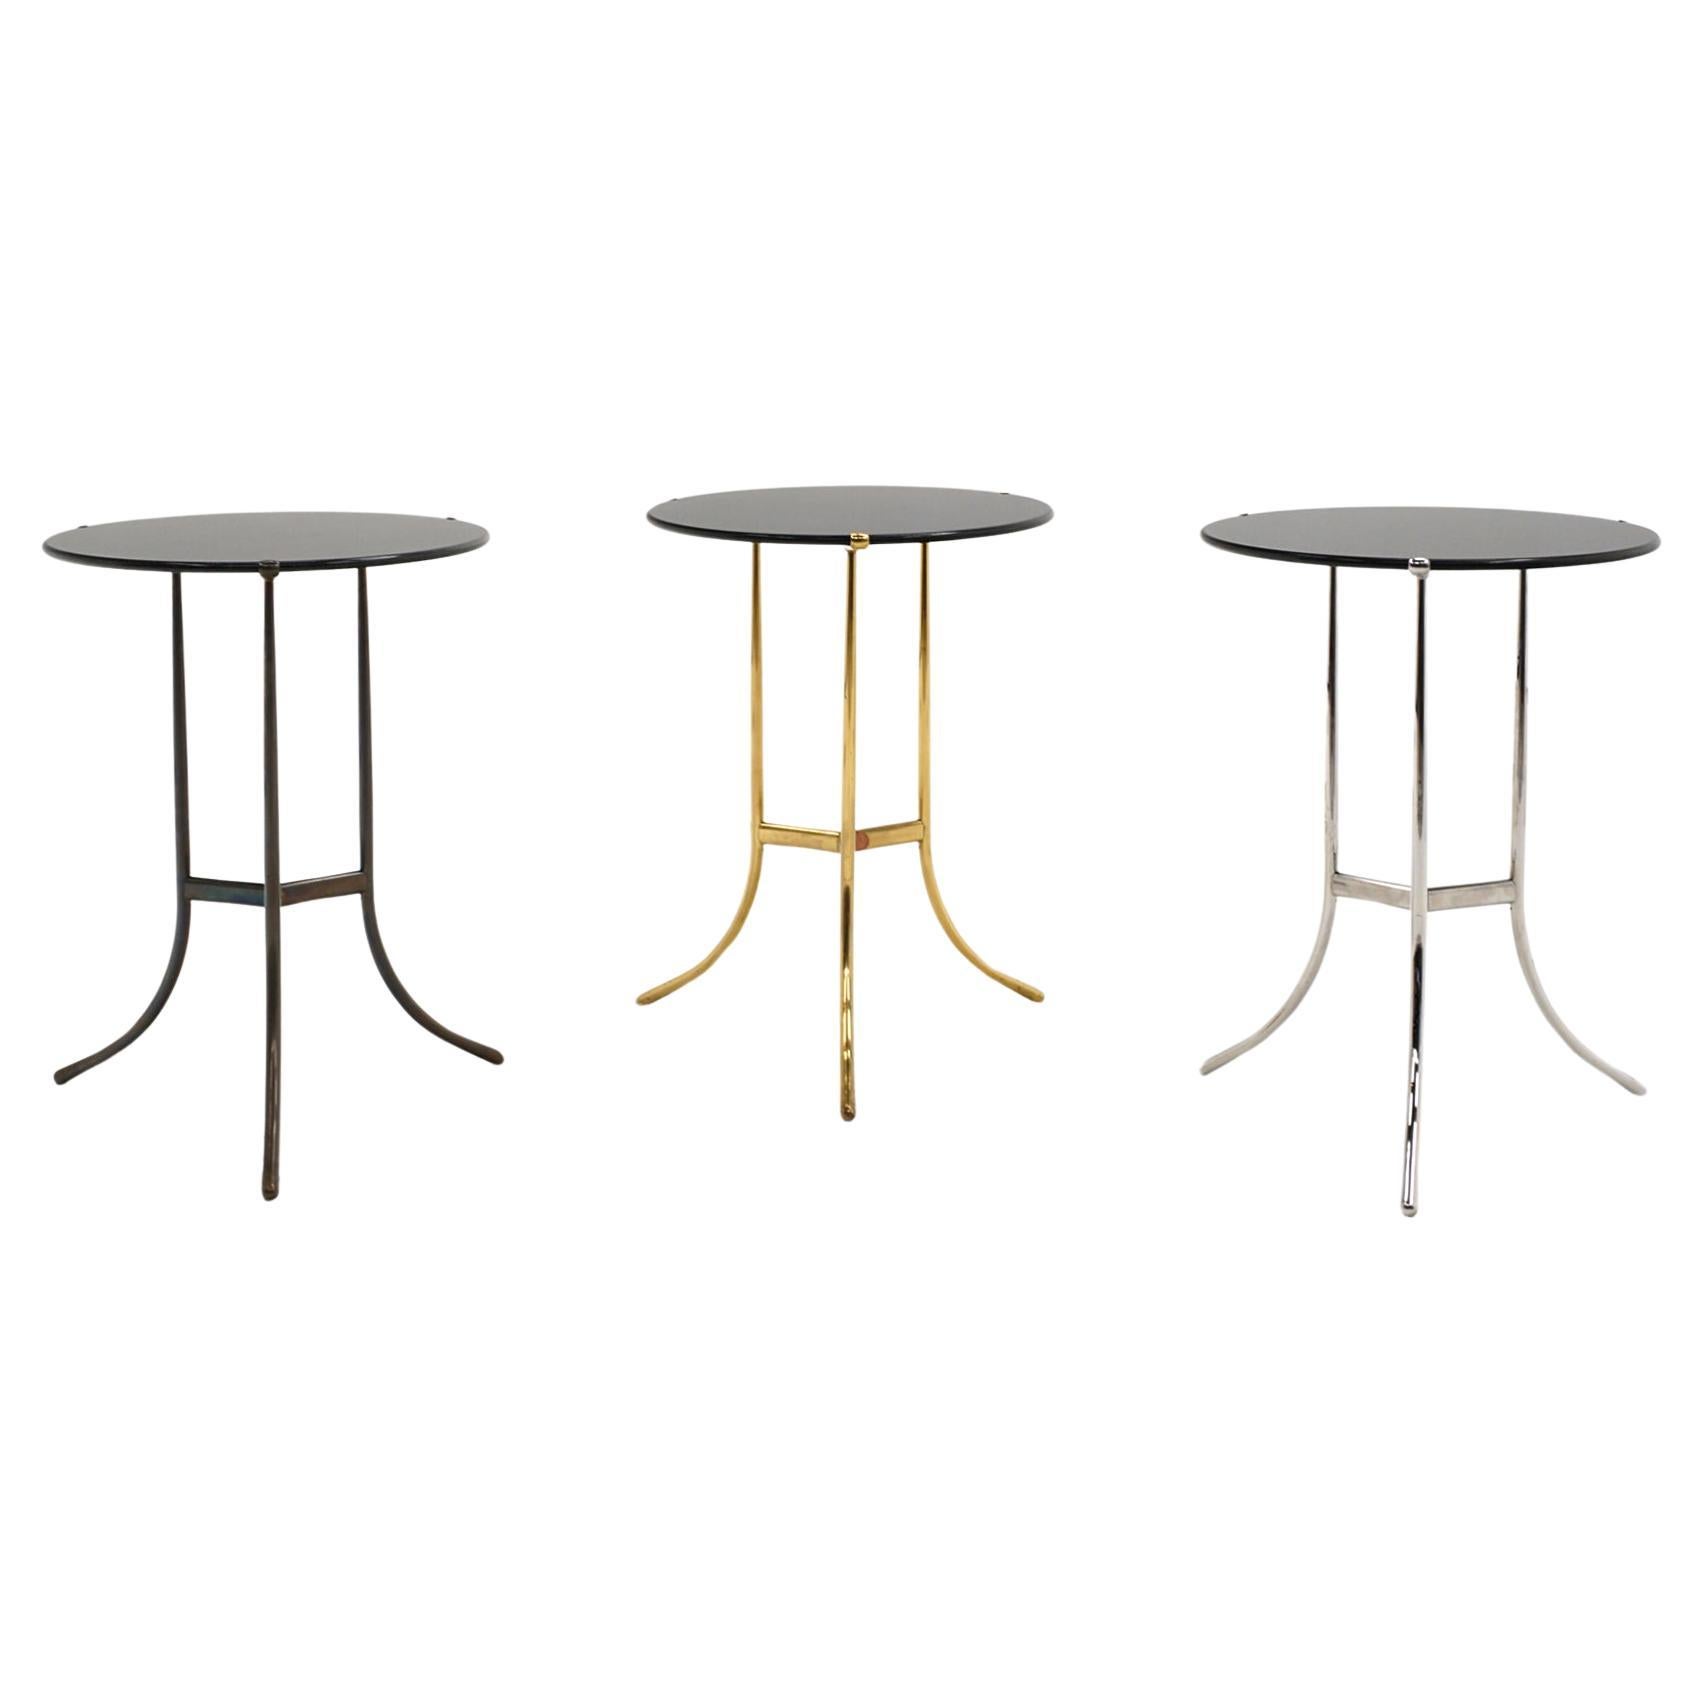 Three Cedric Hartman Side Tables in Three different Finishes. Granite Tops.